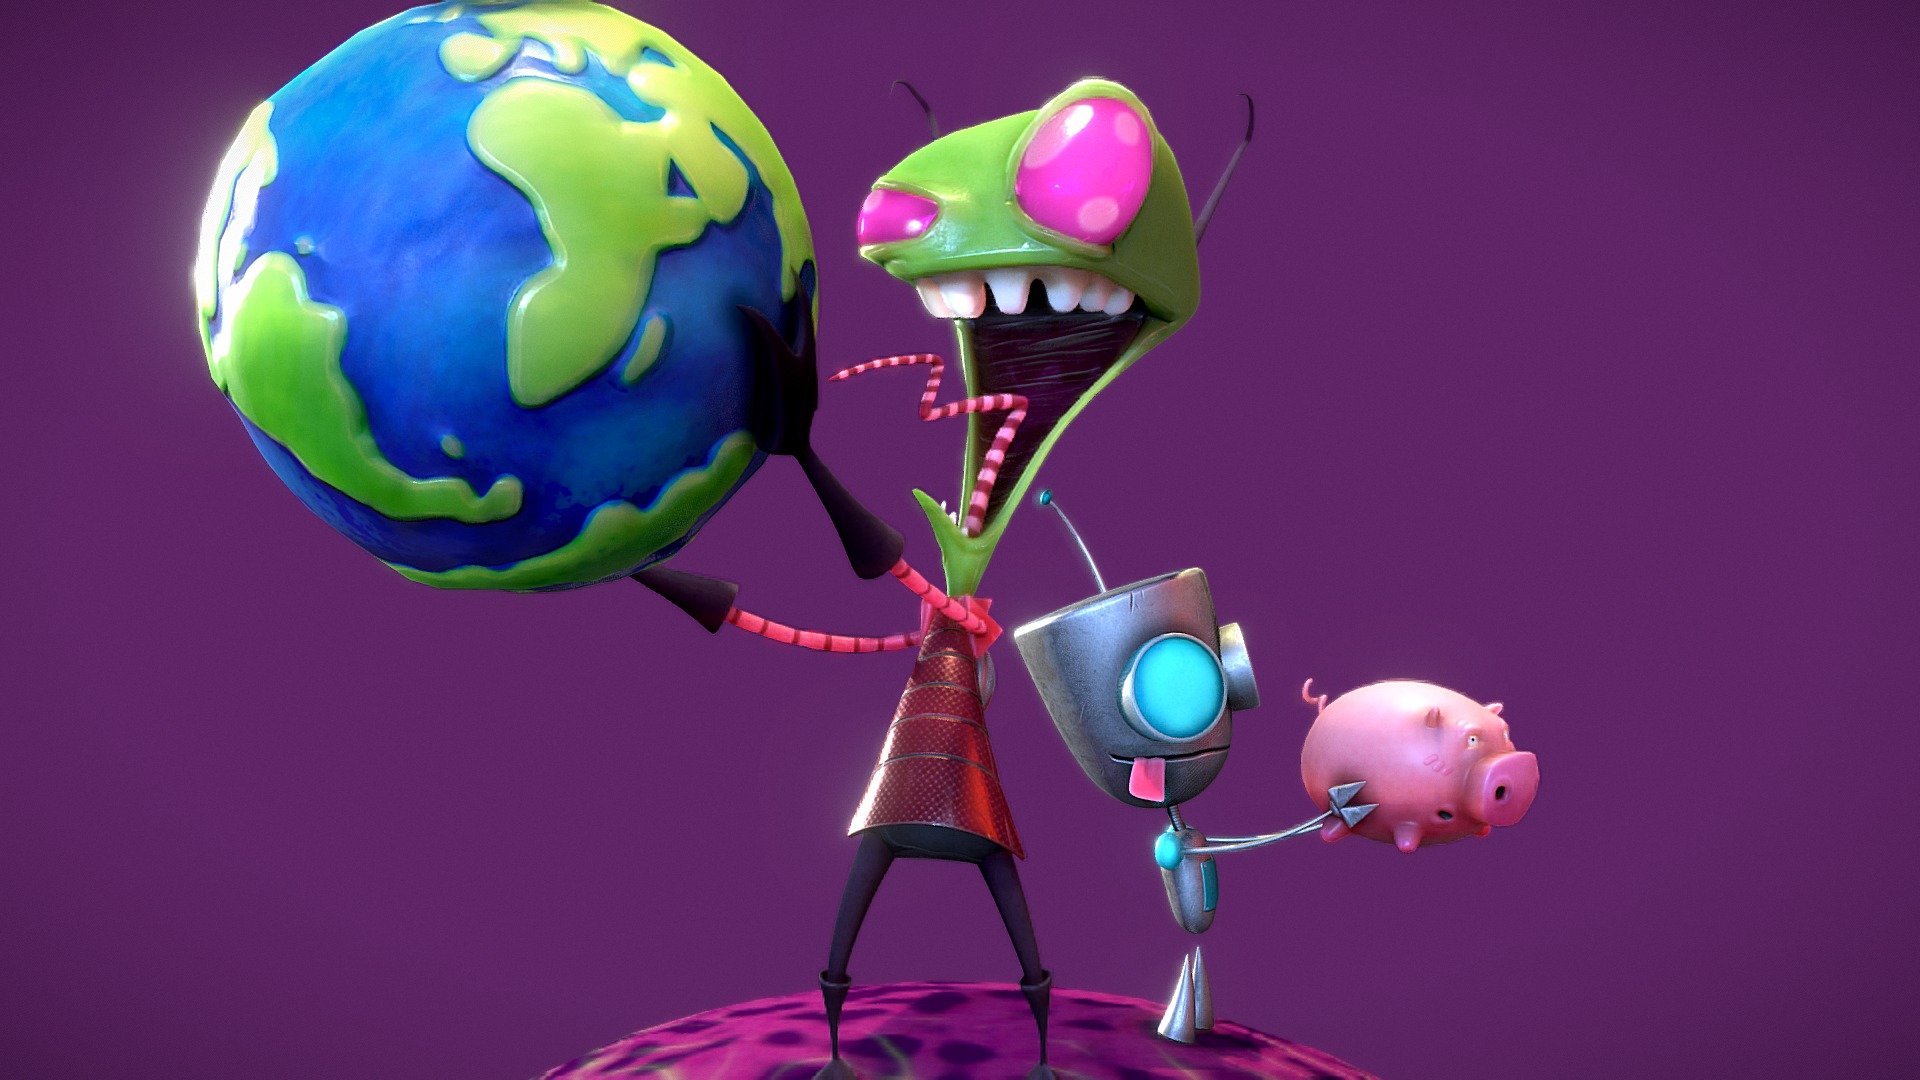 It's been a long time i wanted to create an Invader Zim 3D character, so here it is. i hop you guys will like it ! Created in Maya, Zbrush, Photoshop and Substance painter 3d model